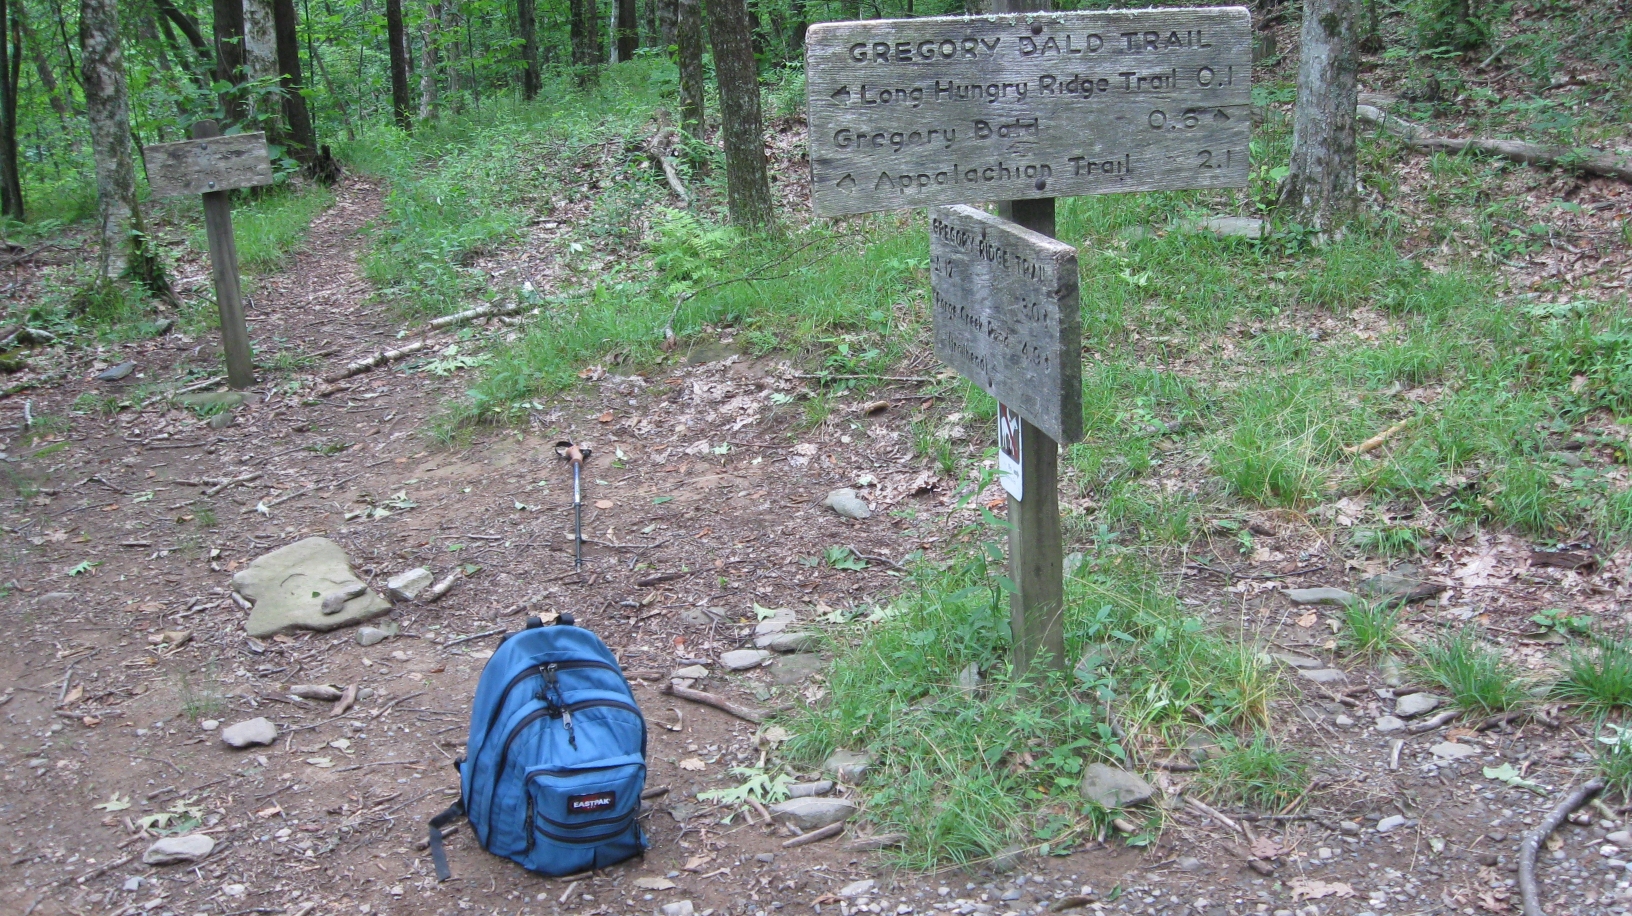 End of Gregory Ridge Trail